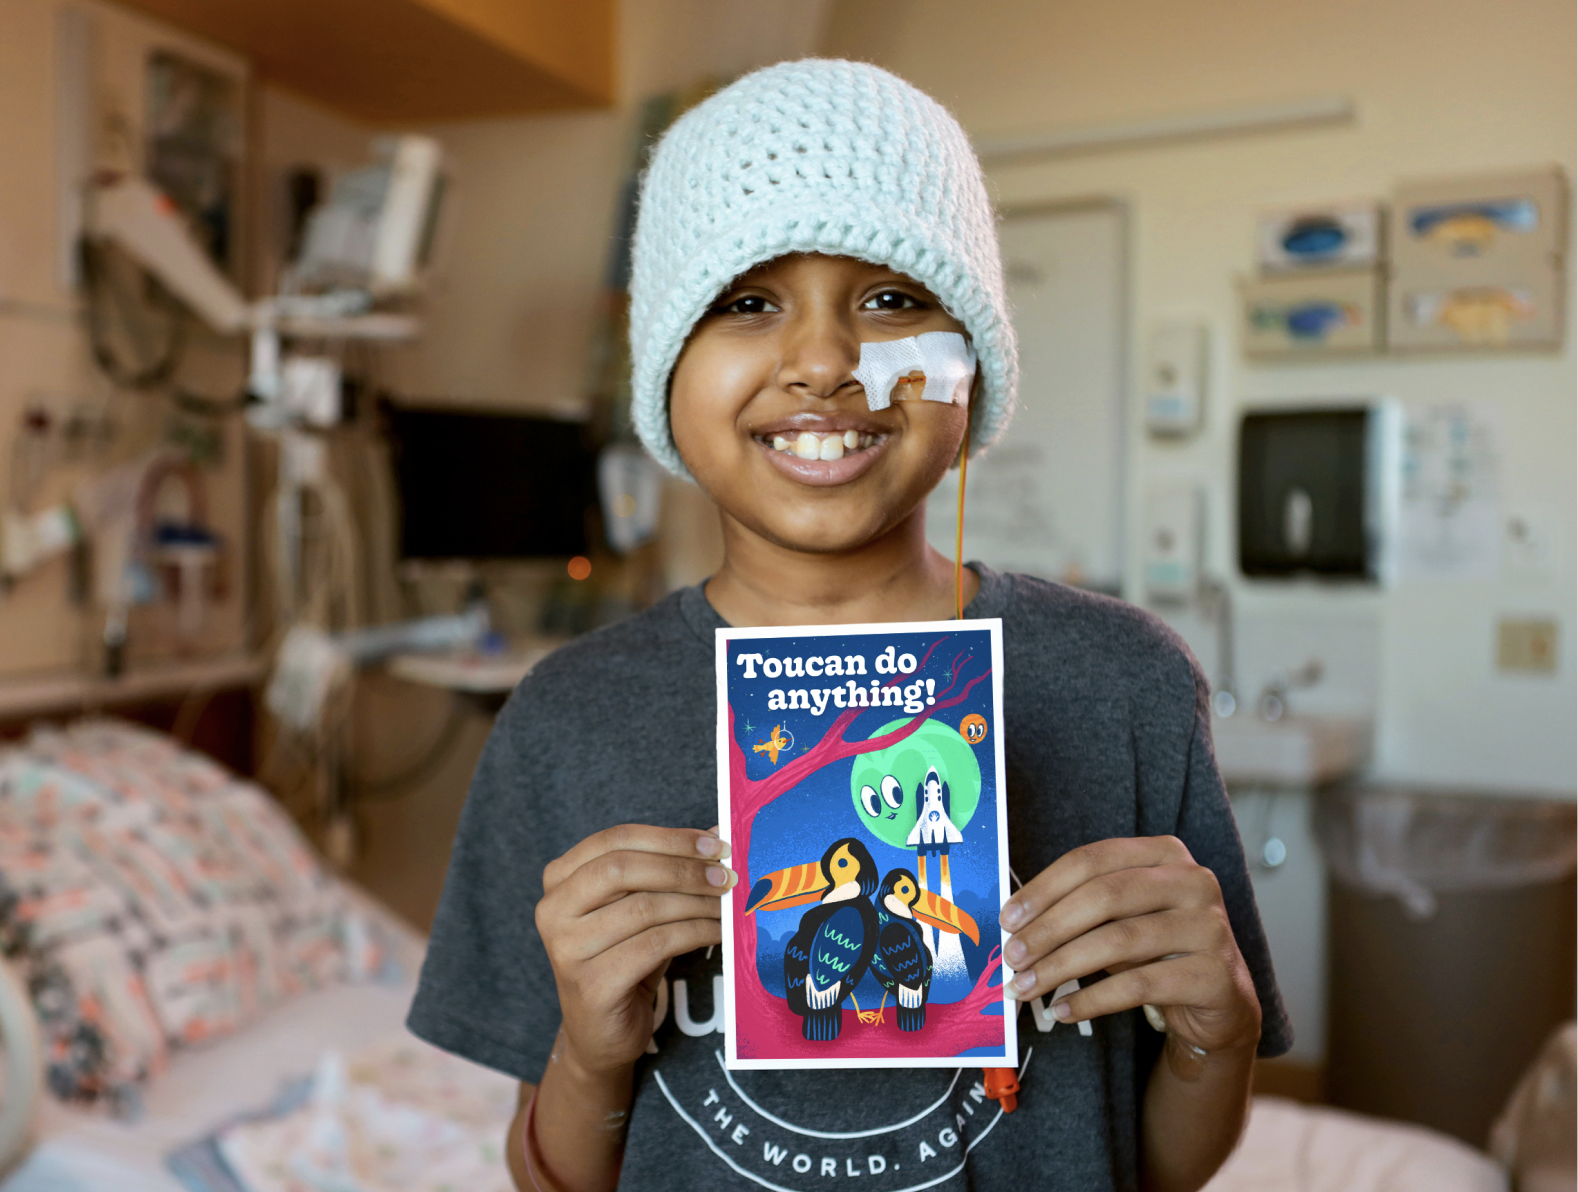 A child is smiling and holding a card that reads, "Toucan do anything!"